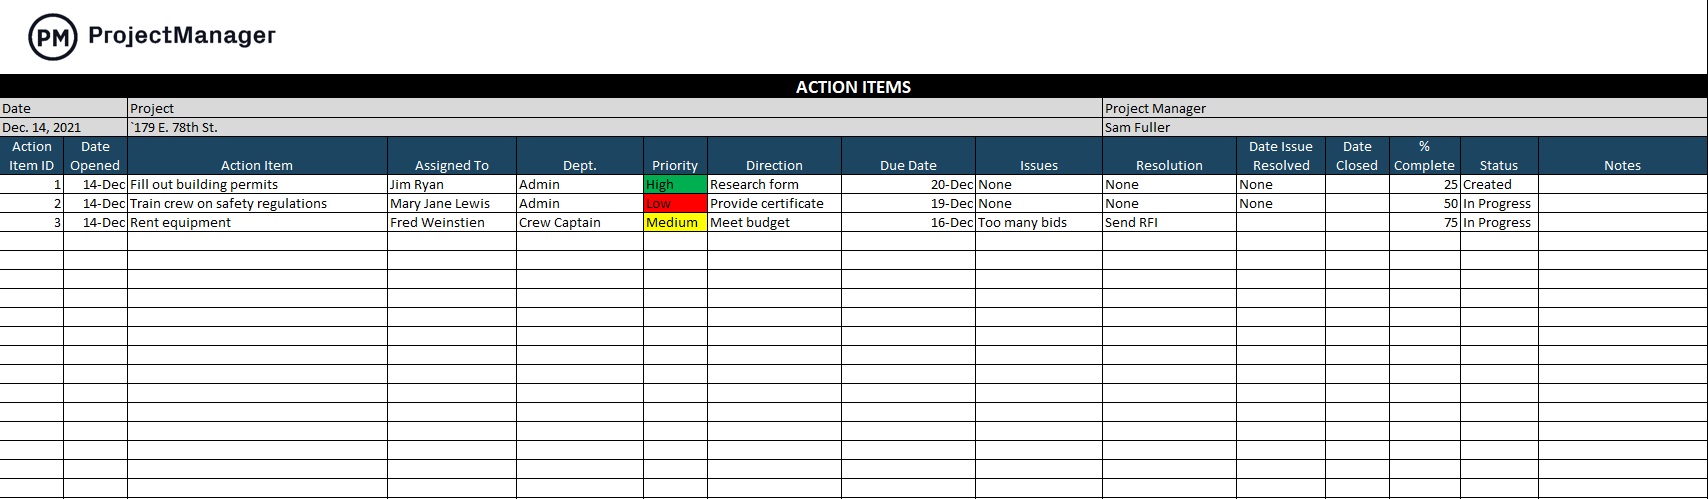 action tracker excel template